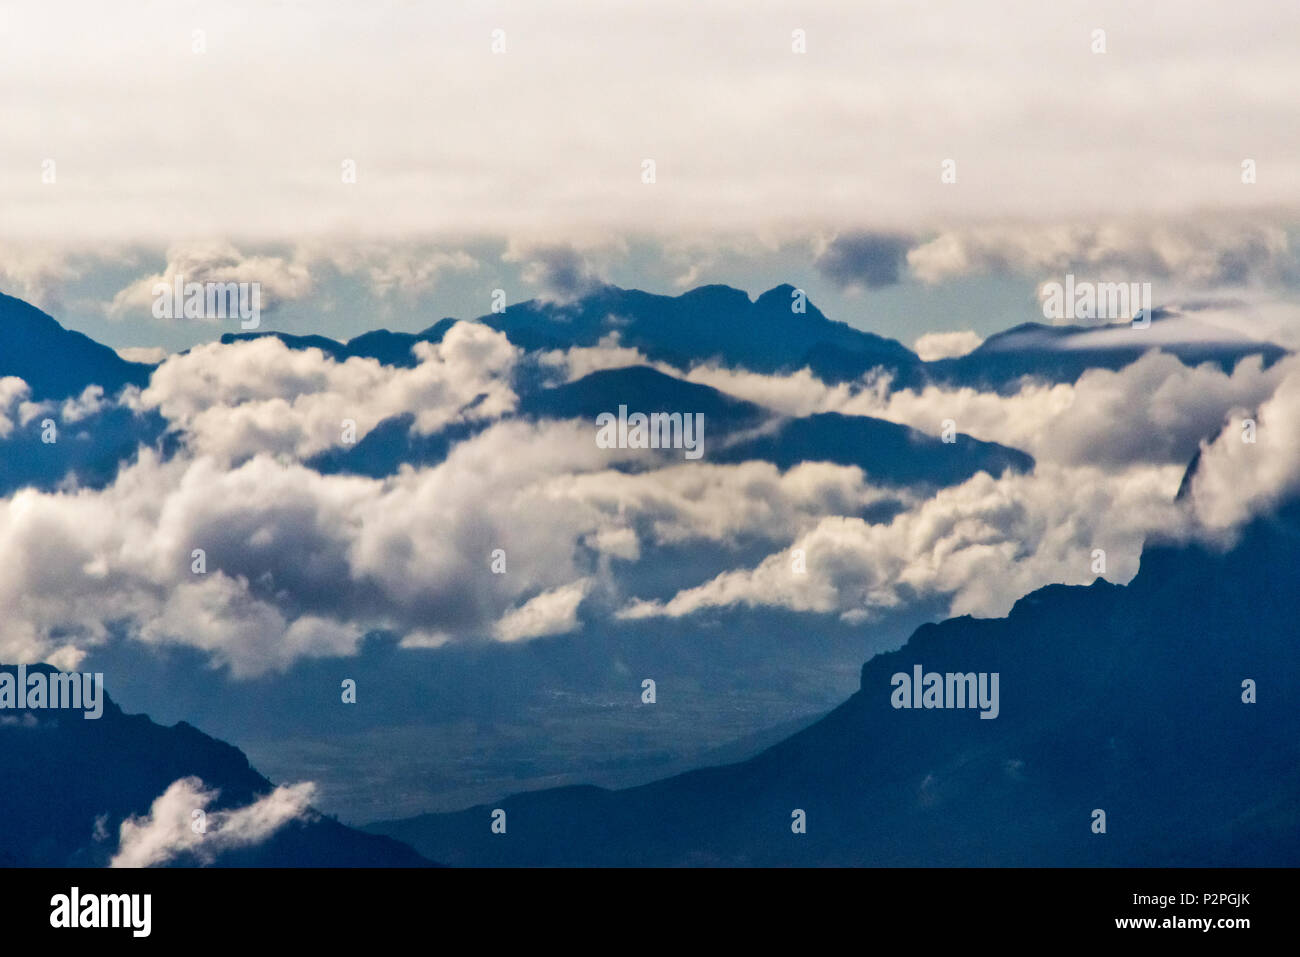 Aerial view of mountain with clouds, South Africa Stock Photo